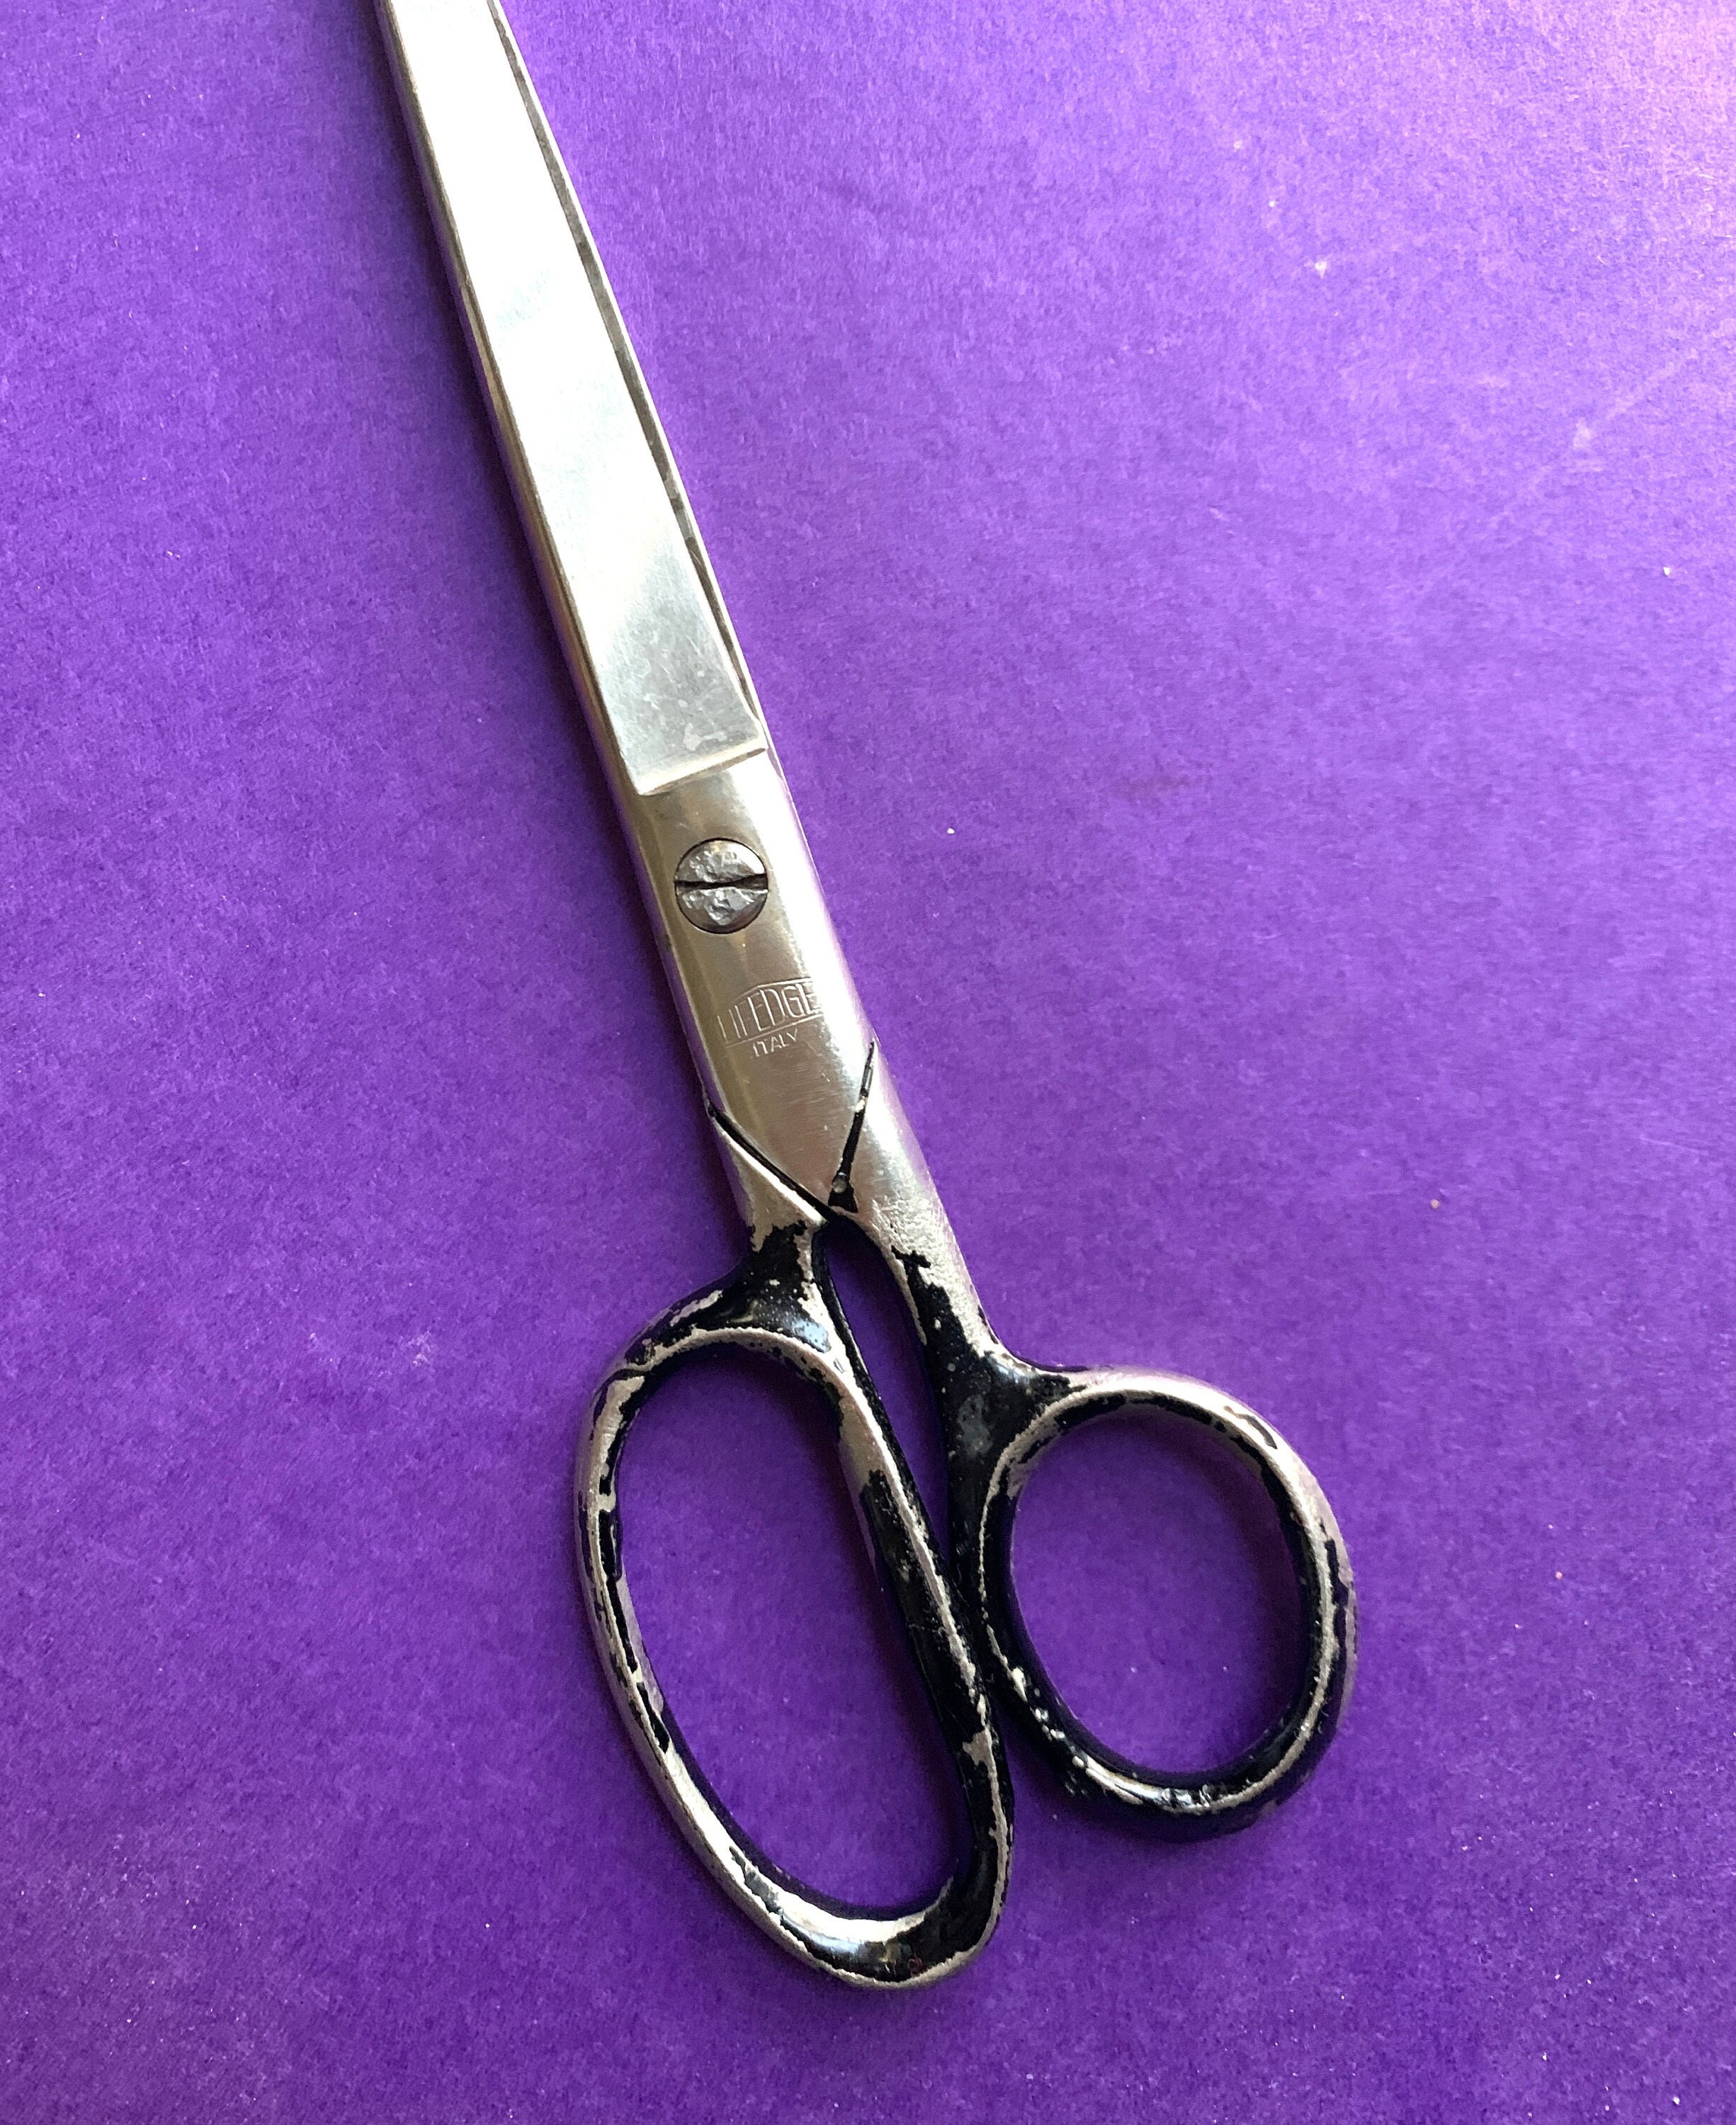 New German Sewing Fabric Scissors Dress Making Tailor Scissor Stainless  Steel Clothing Cutting Shears Heavy Duty Ultra Sharp OEM - Buy New German Sewing  Fabric Scissors Dress Making Tailor Scissor Stainless Steel